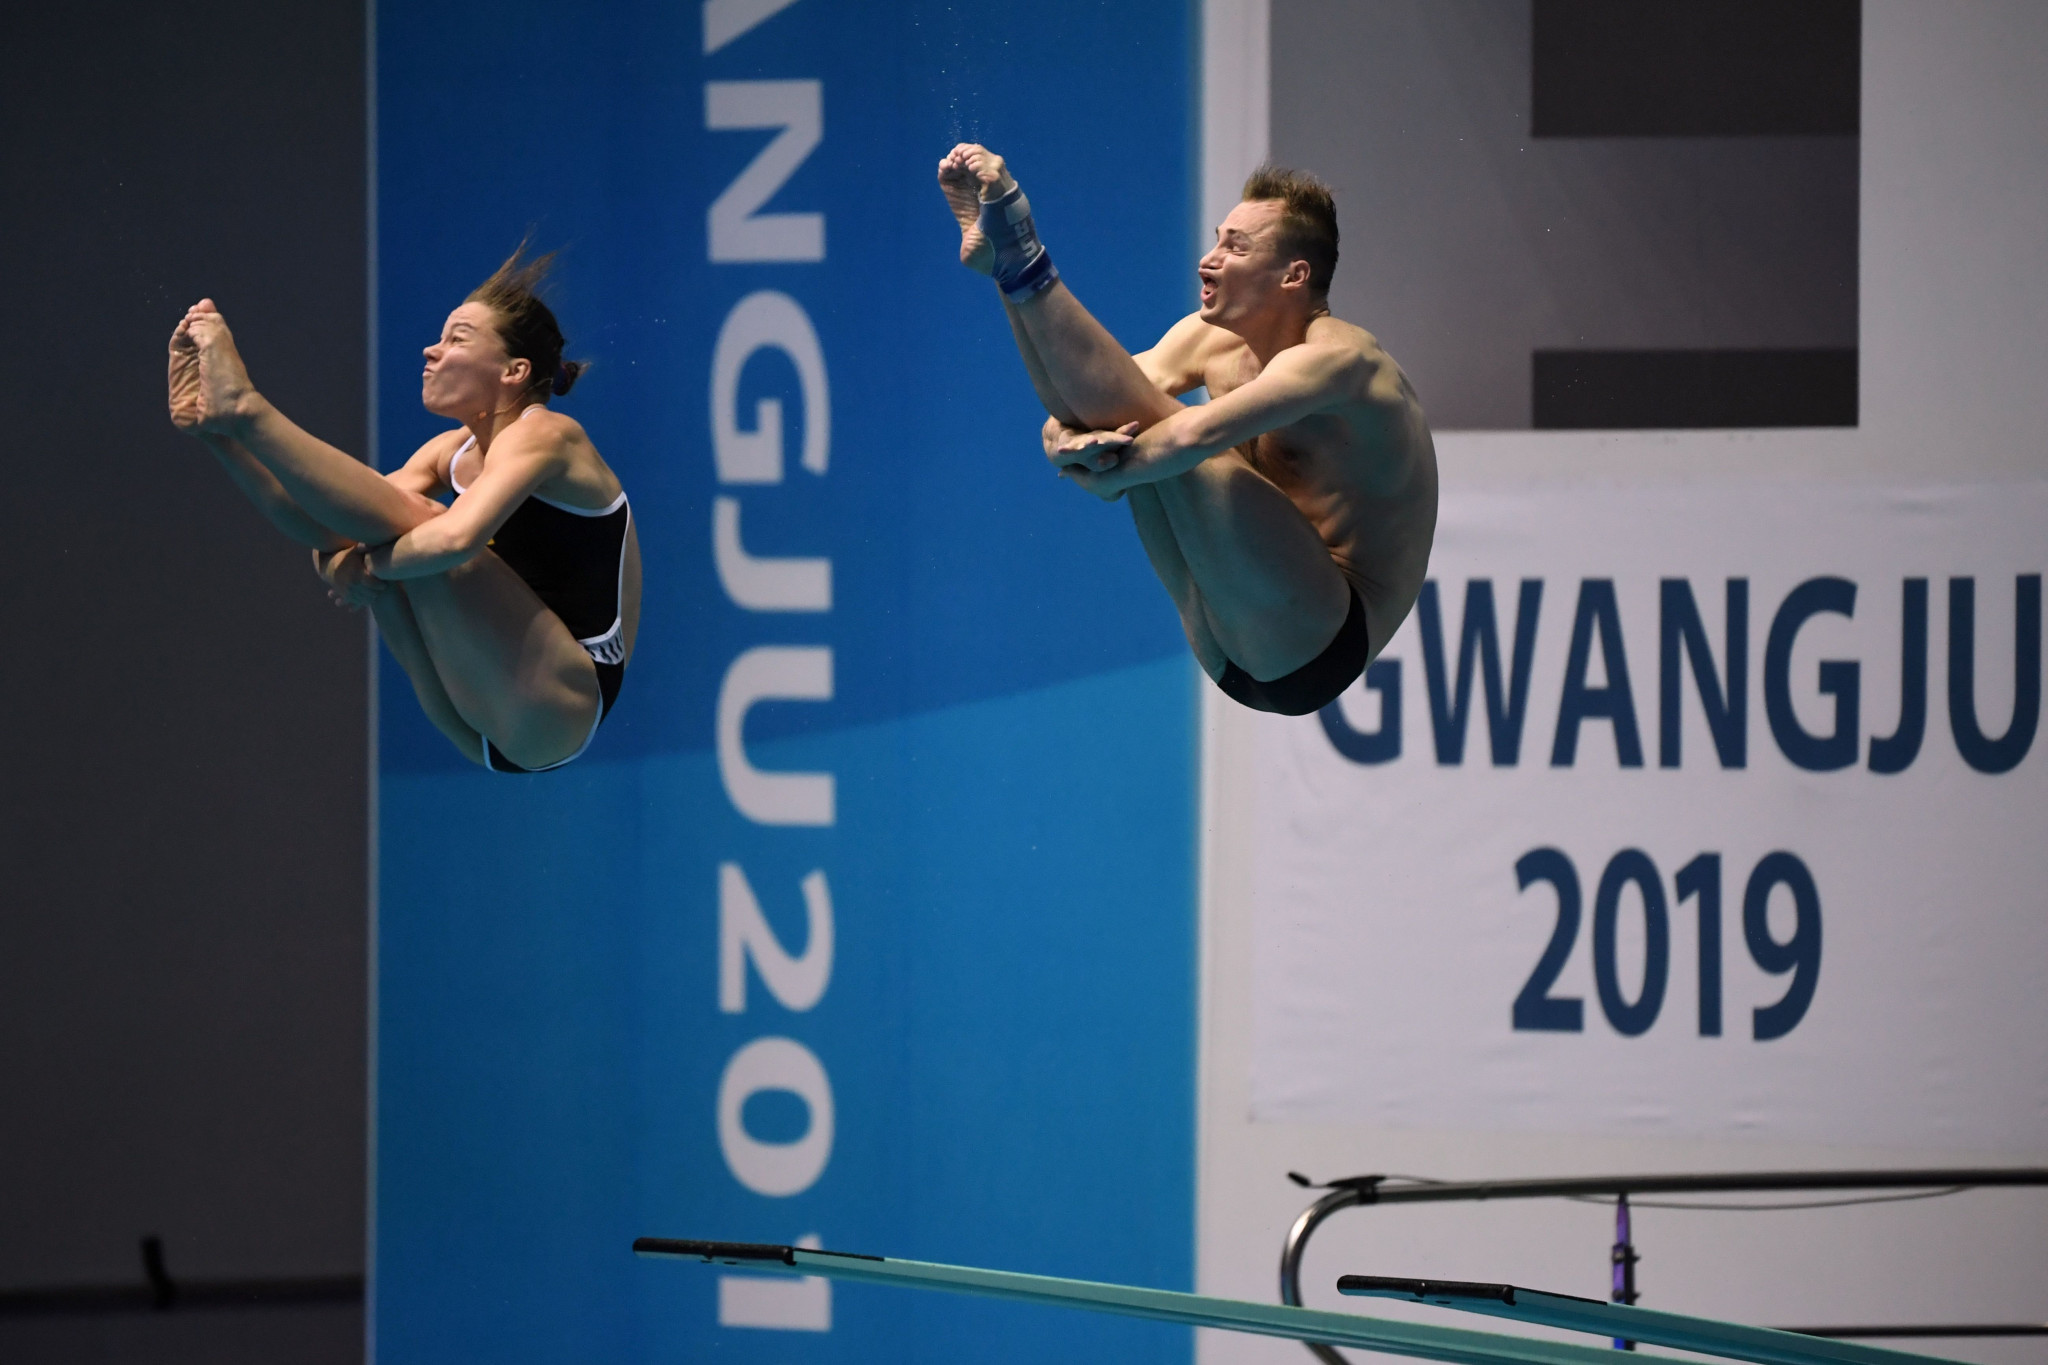 Hosts Ukraine claim two gold medals at European Diving Championships